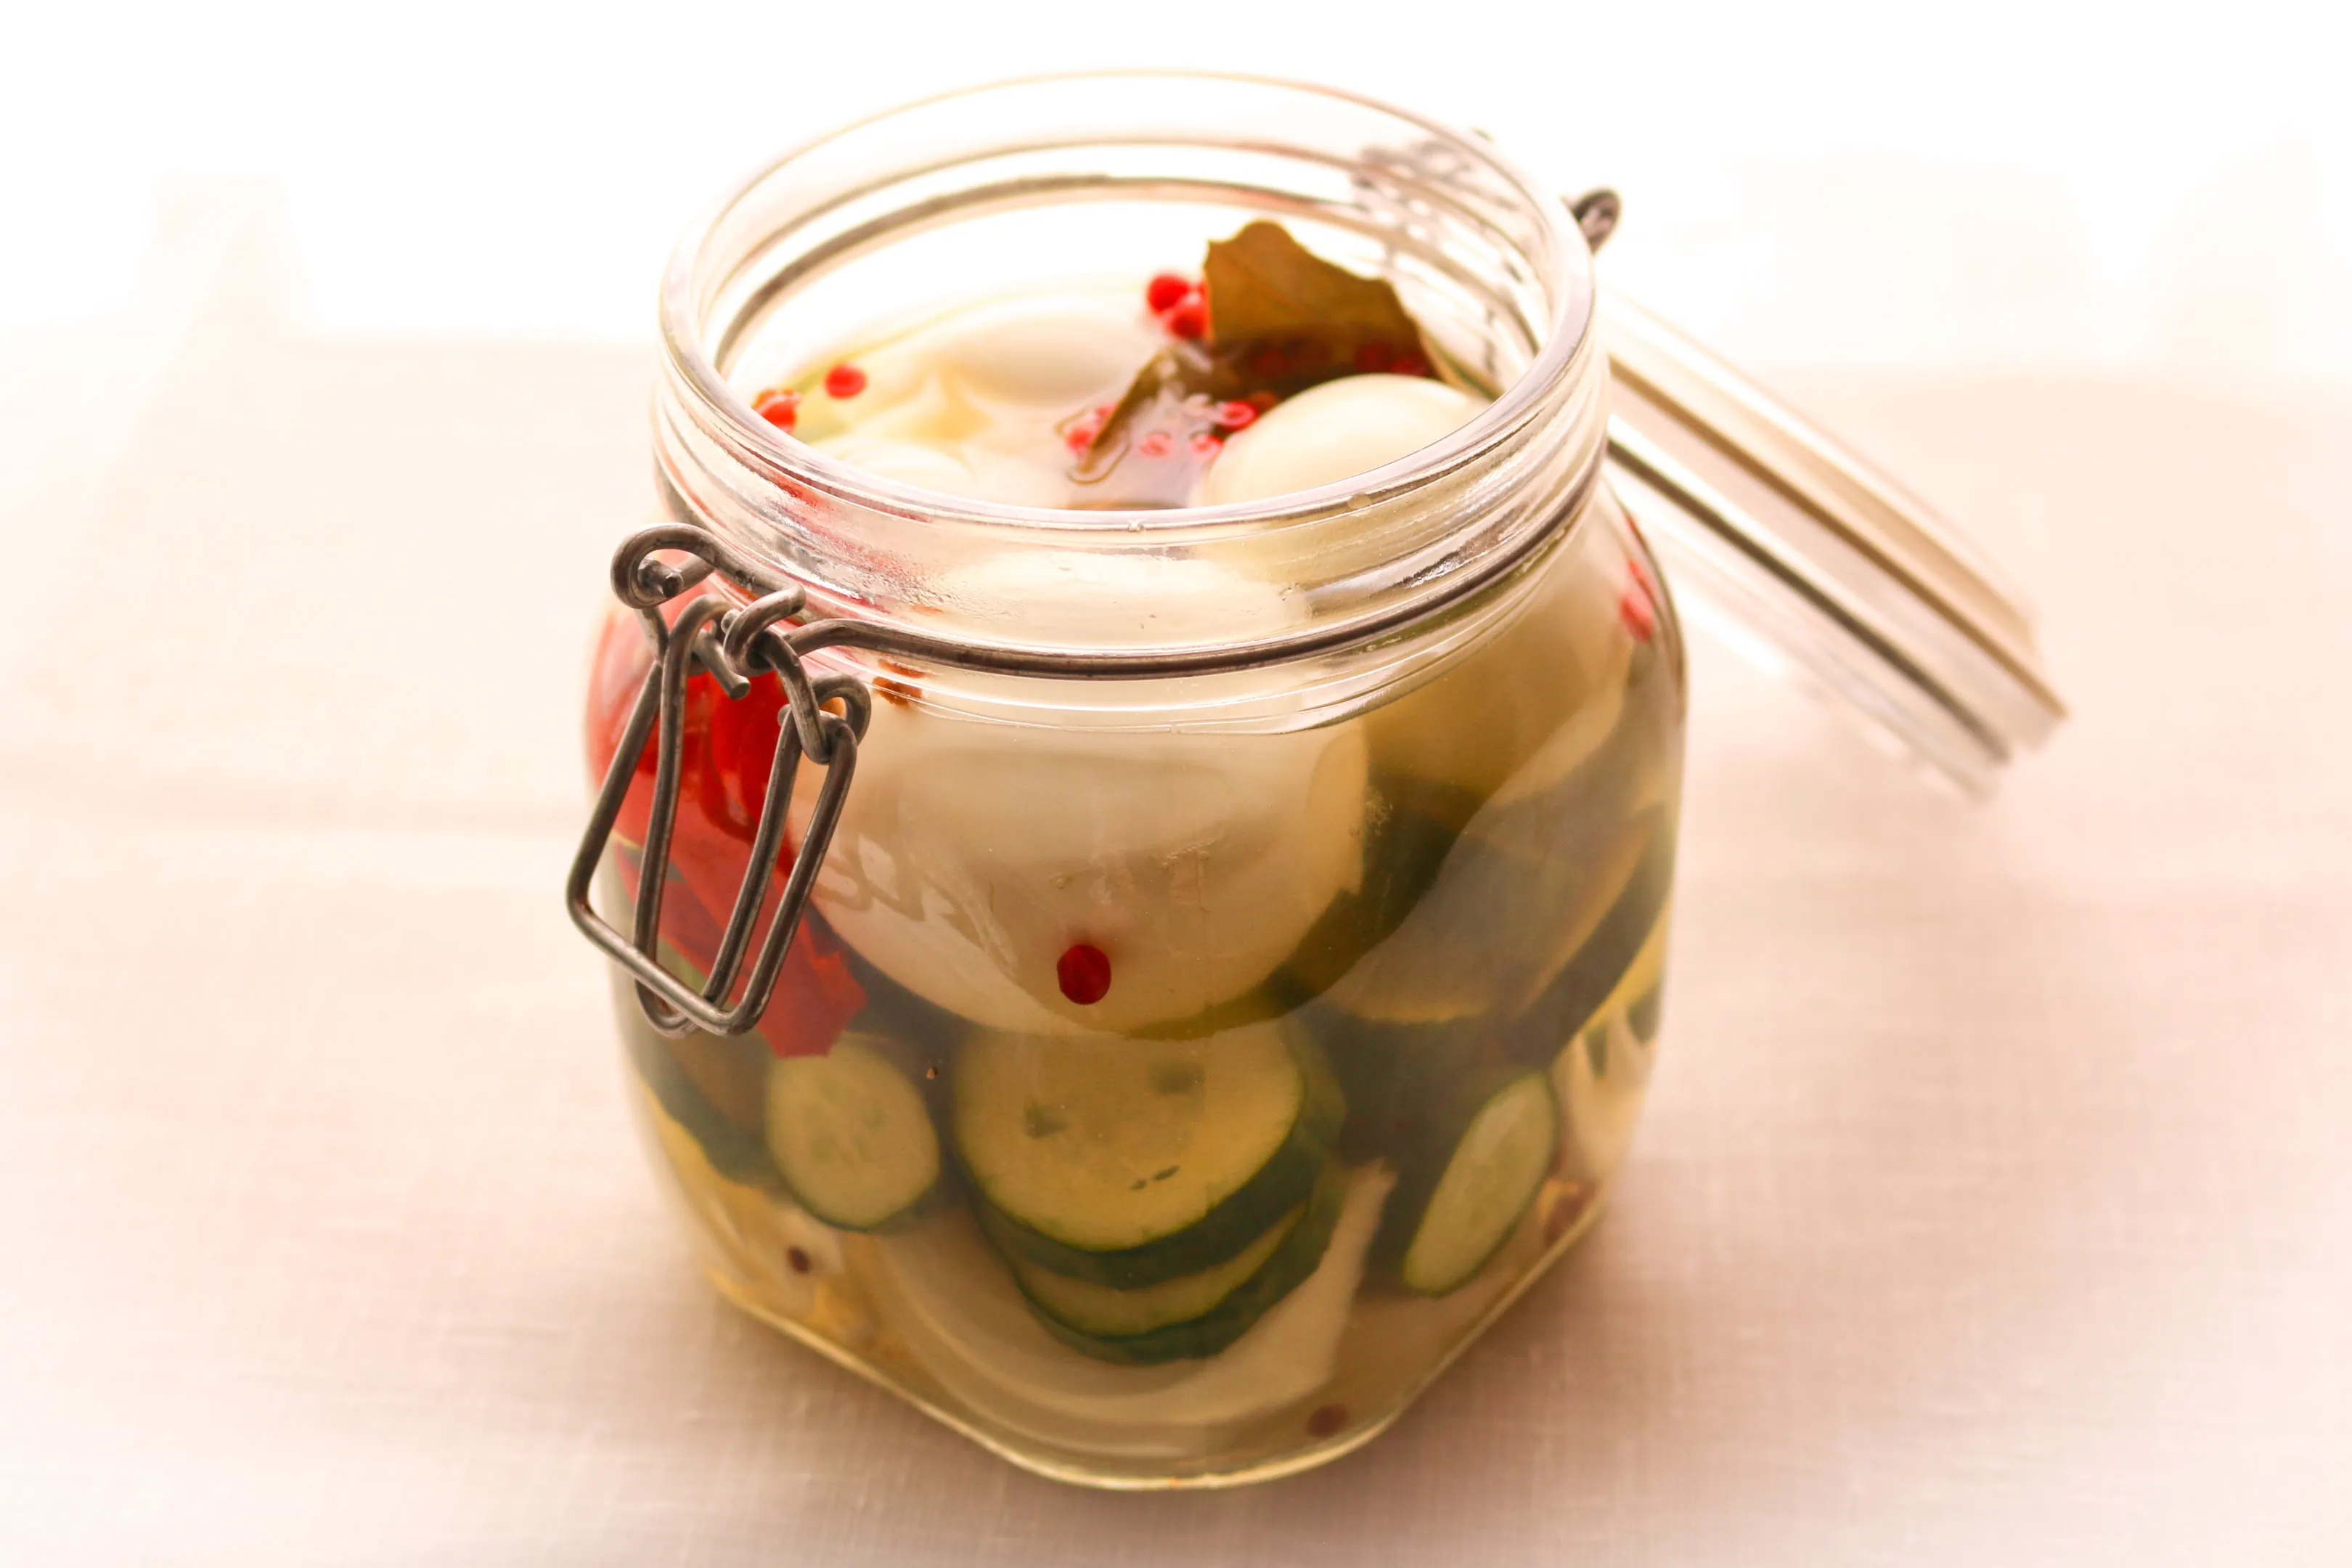 Healthy old-fashioned pickled eggs recipe